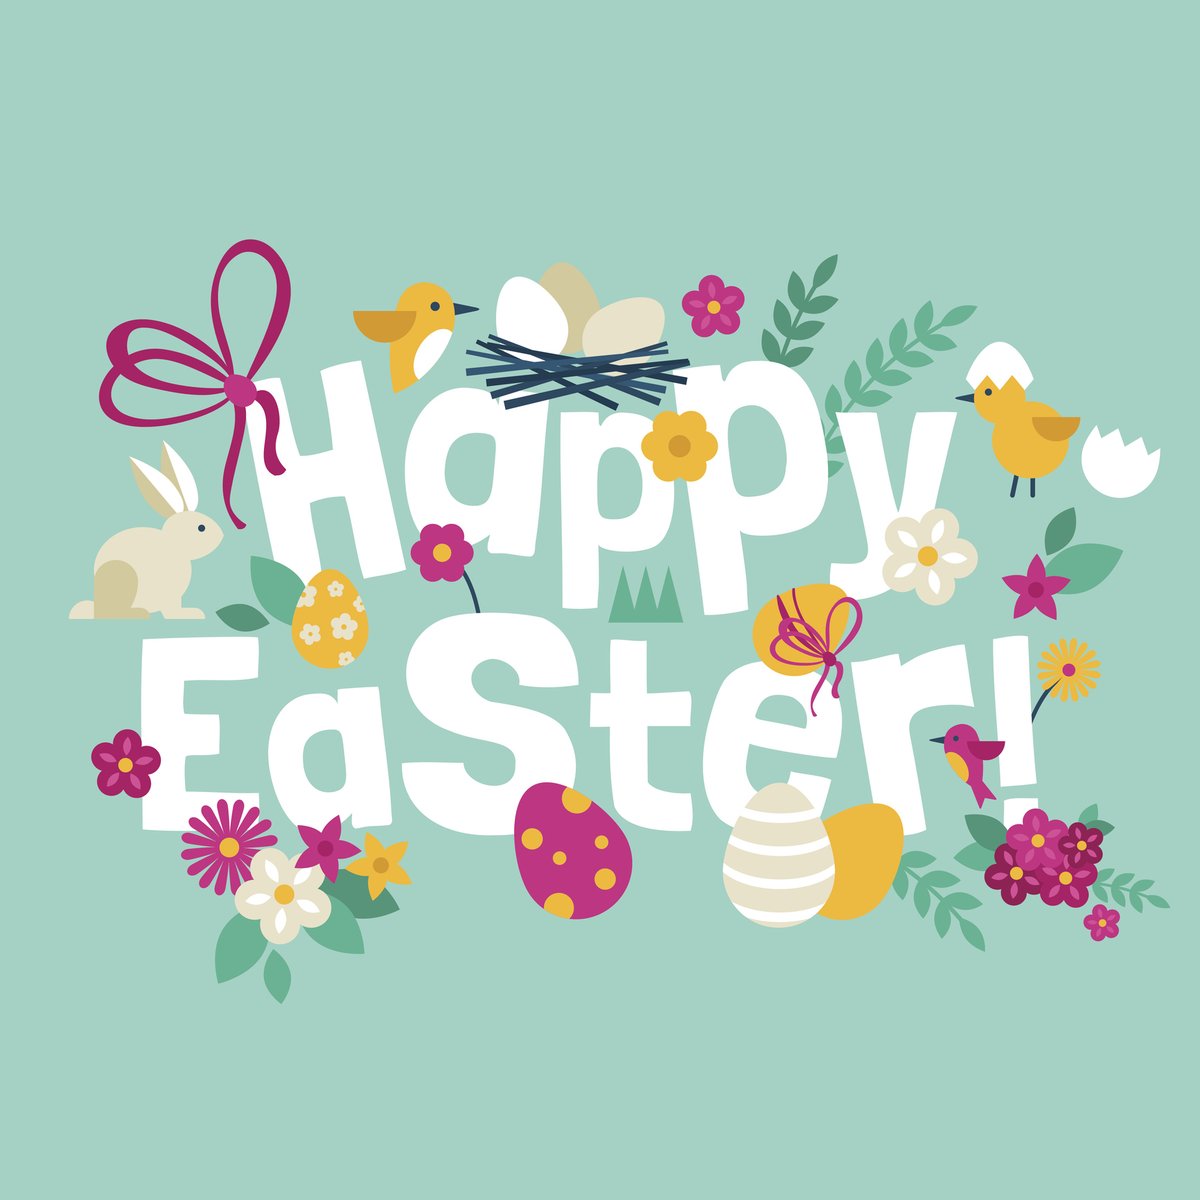 Wishing a Happy Easter to all who celebrate 🐇🐣🌷